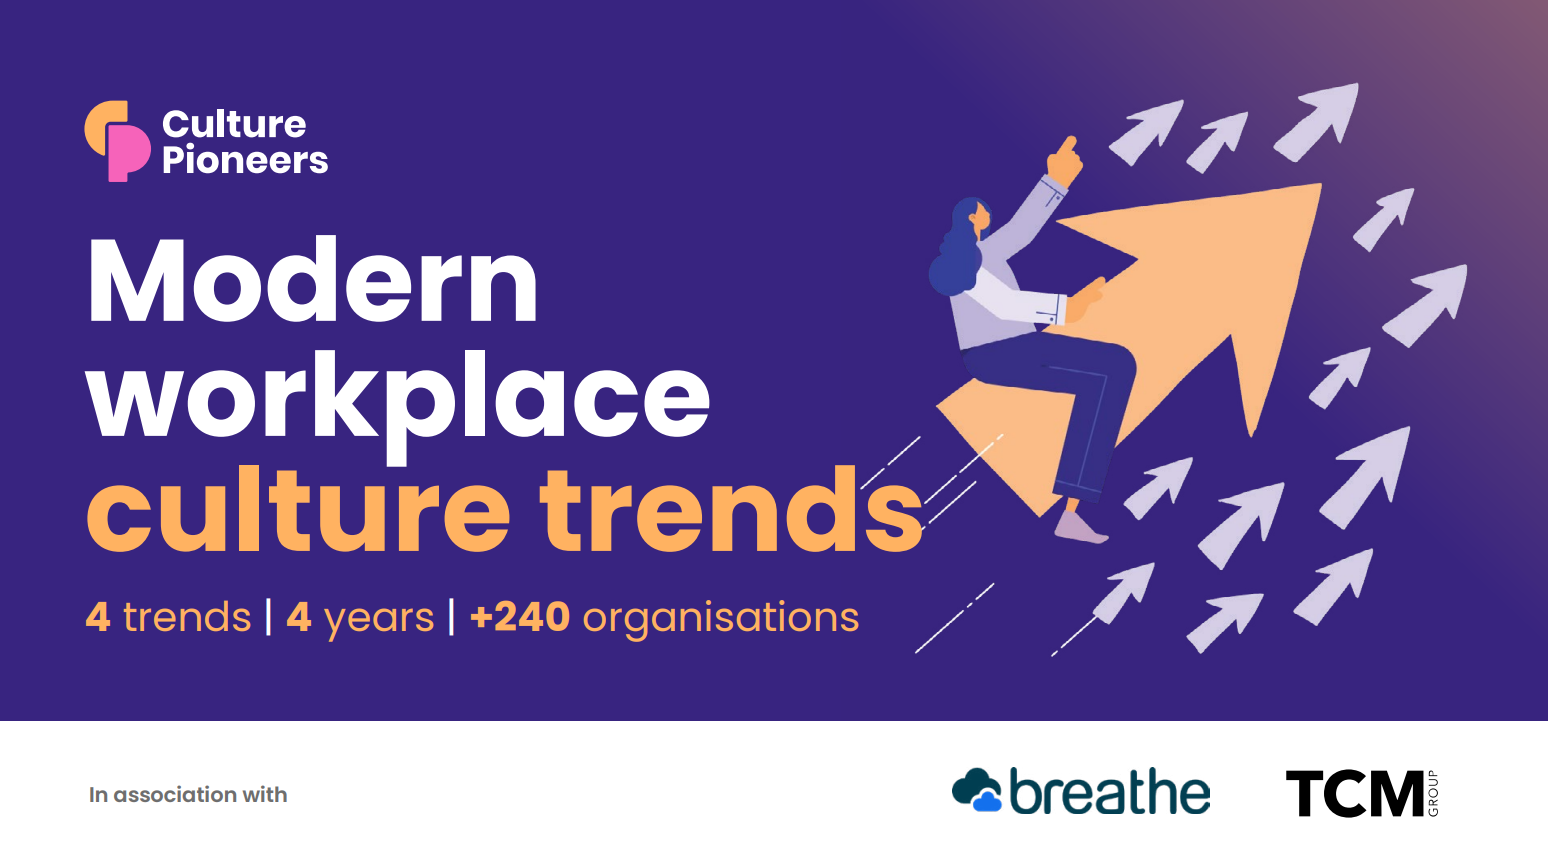 Modern workplace culture trends report cover